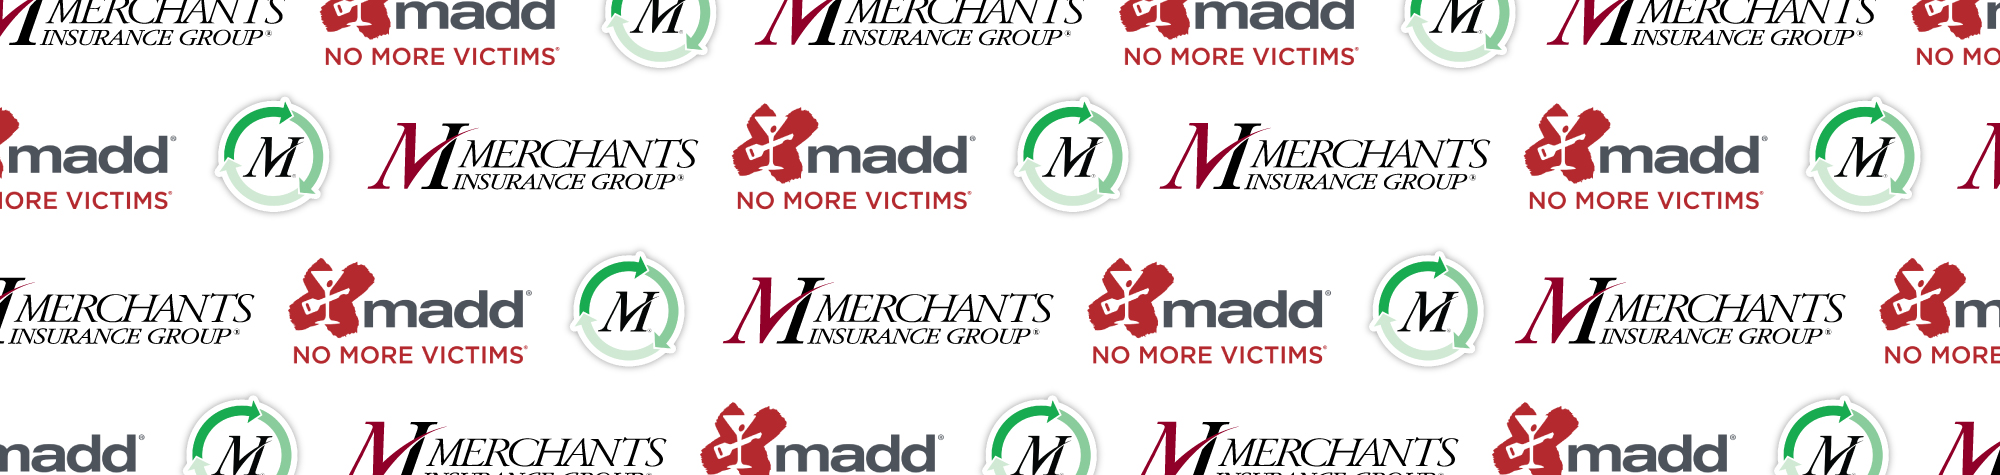 Merchants Insurance Group Continues Encouraging Policyholders to Go Paperless Through Donations to MADD in 2022